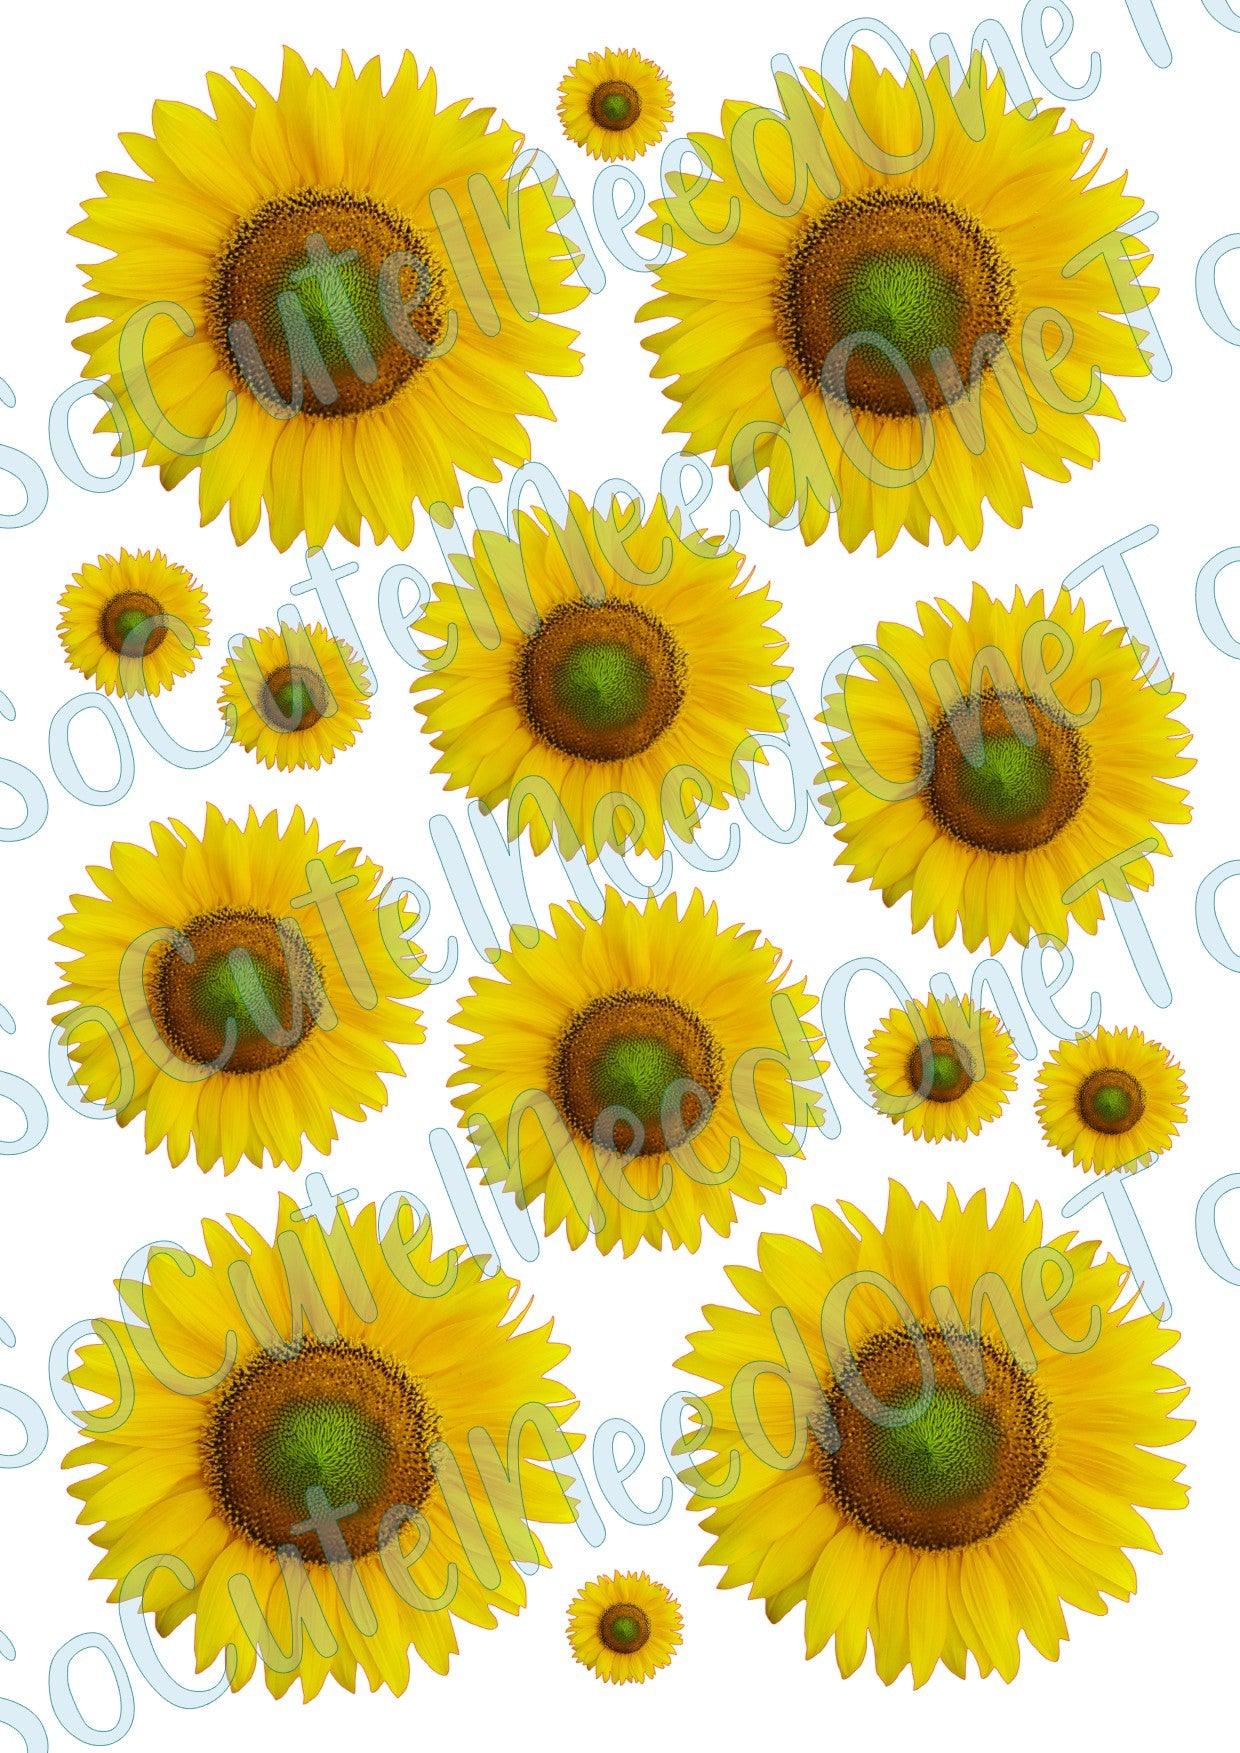 Sunflowers -3.5 and 2.5 Sizes - on Clear/White Waterslide Paper Ready To Use - SoCuteINeedOneToo